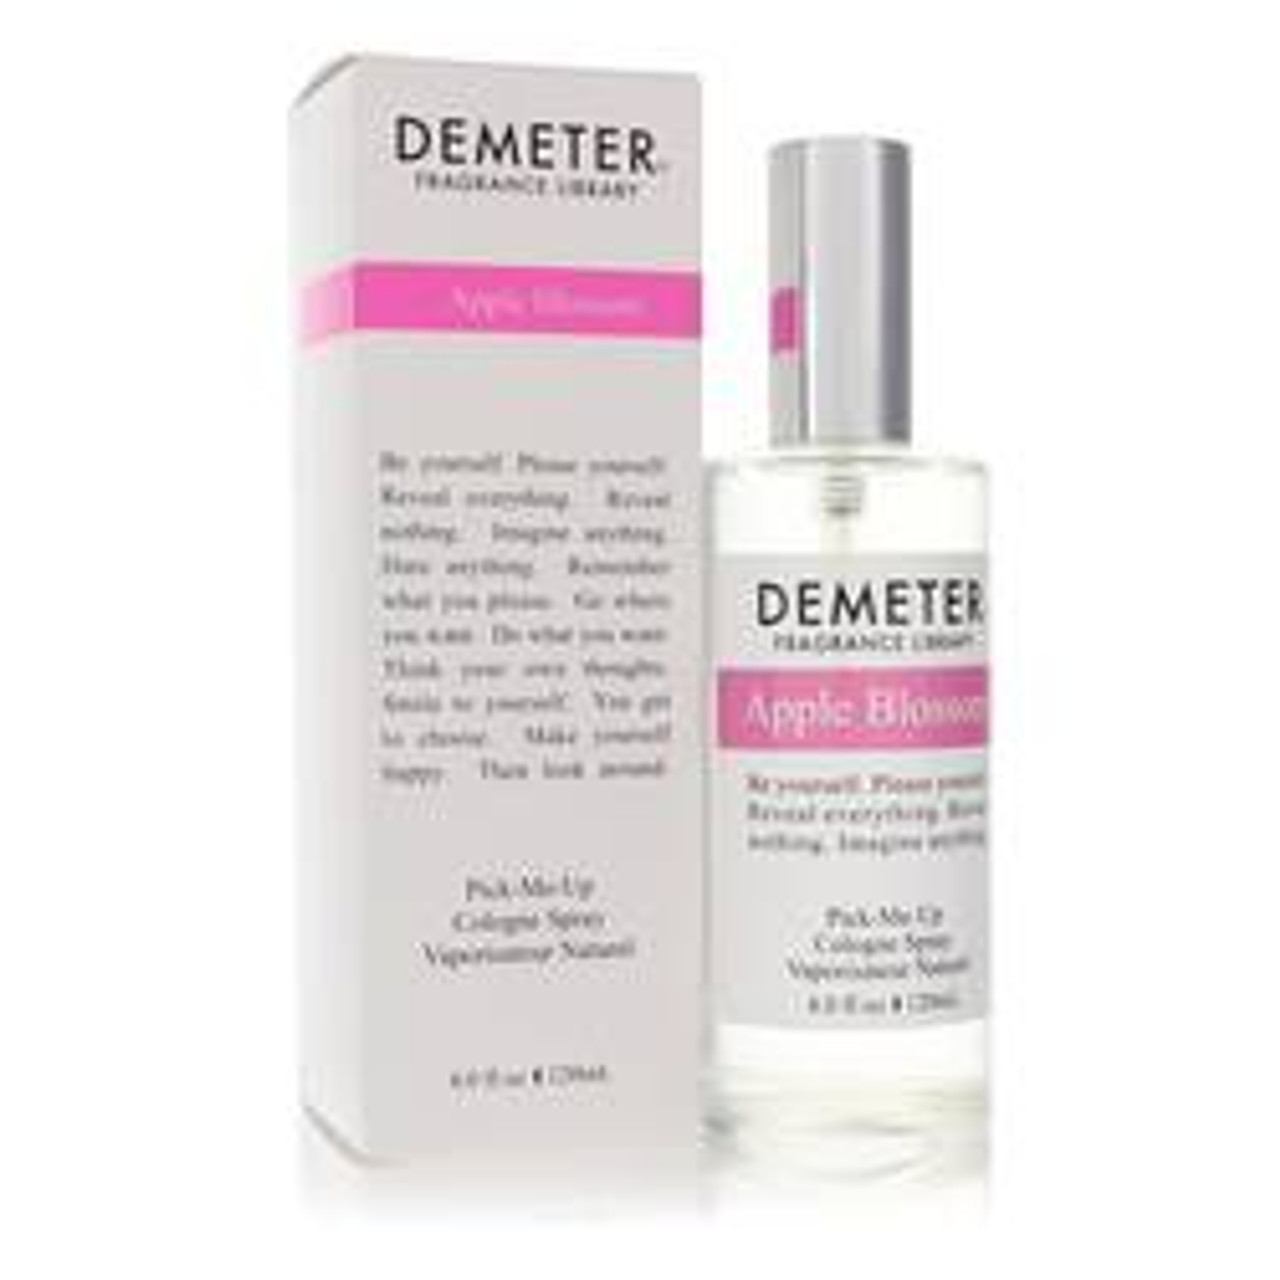 Demeter Apple Blossom Perfume By Demeter Cologne Spray 4 oz for Women - [From 79.50 - Choose pk Qty ] - *Ships from Miami